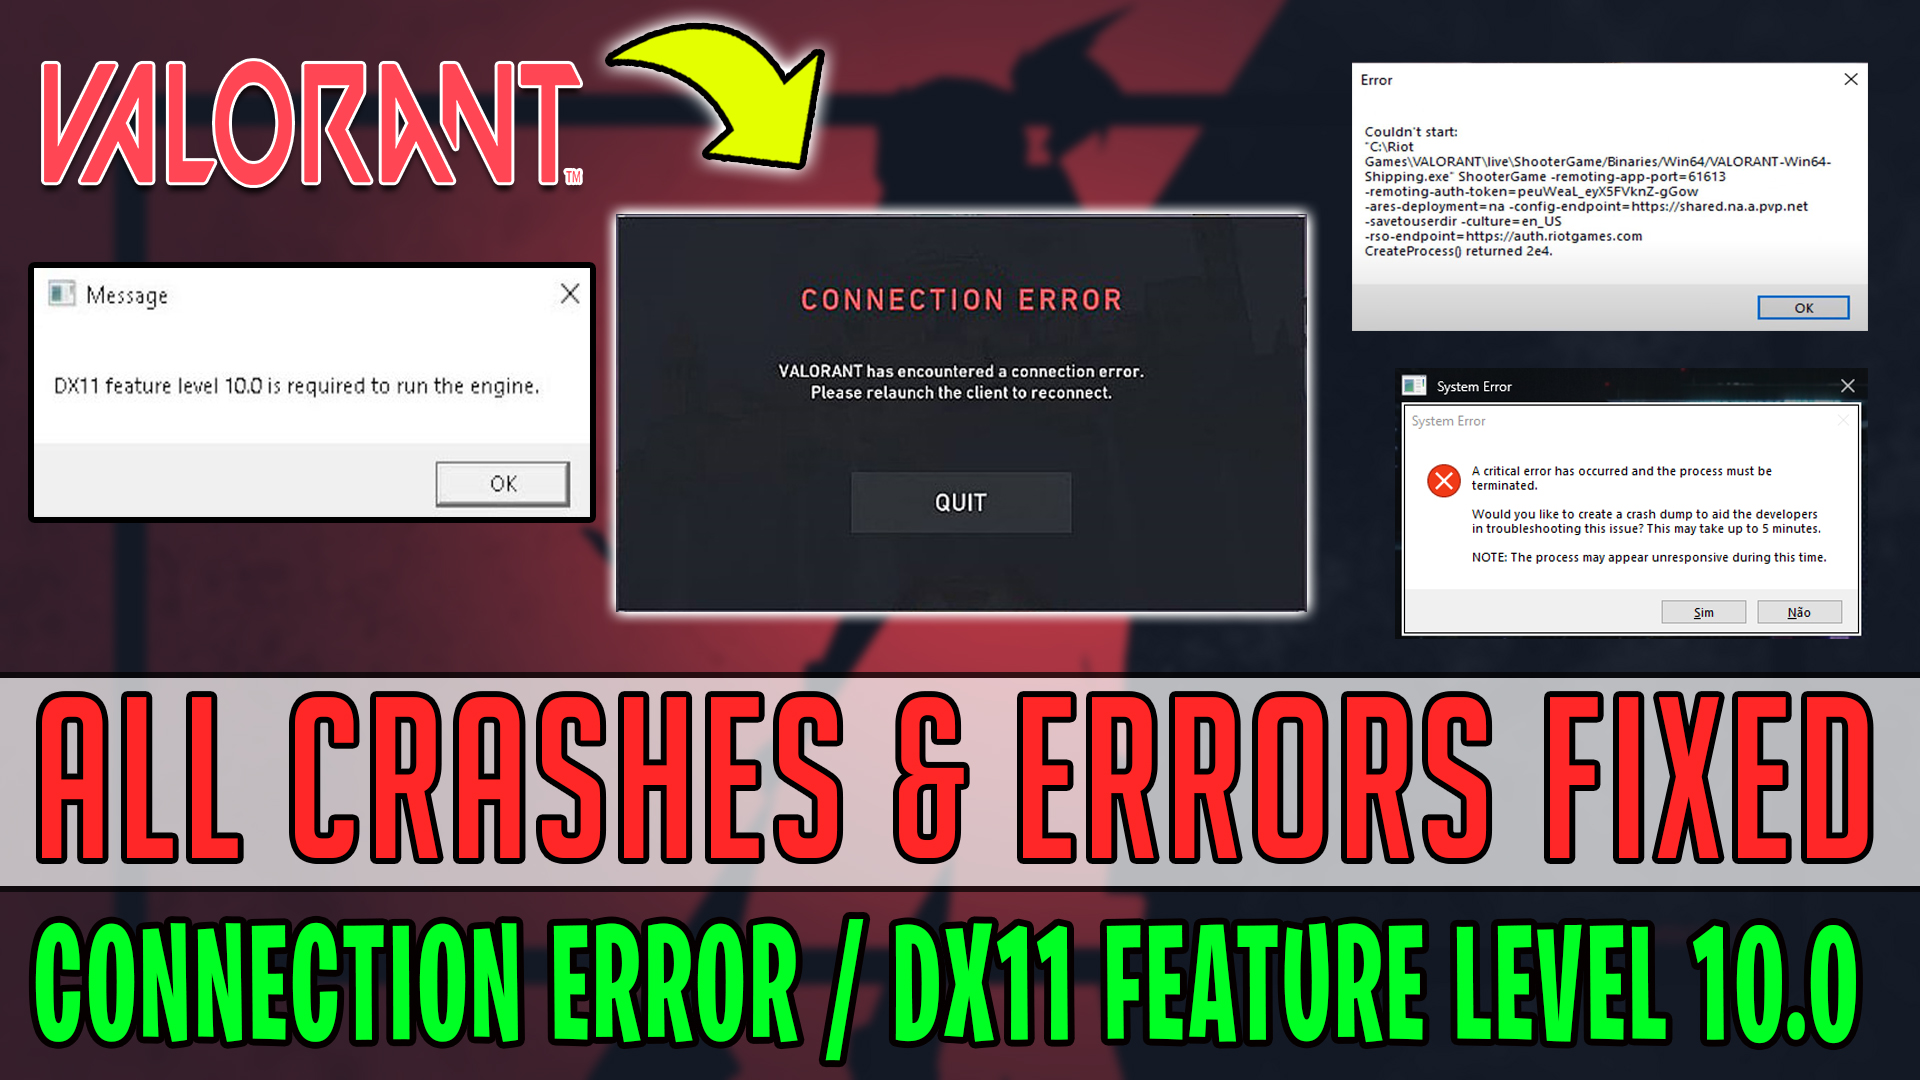 Dx11 feature level. Dx11 feature 10.0 is required to Run the engine. Валорант dx11 feature Level 10.0 is required to Run the engine. DX 11 feature Level 10.0 is required Run the engine решение. Critical Error has occurred valorant.